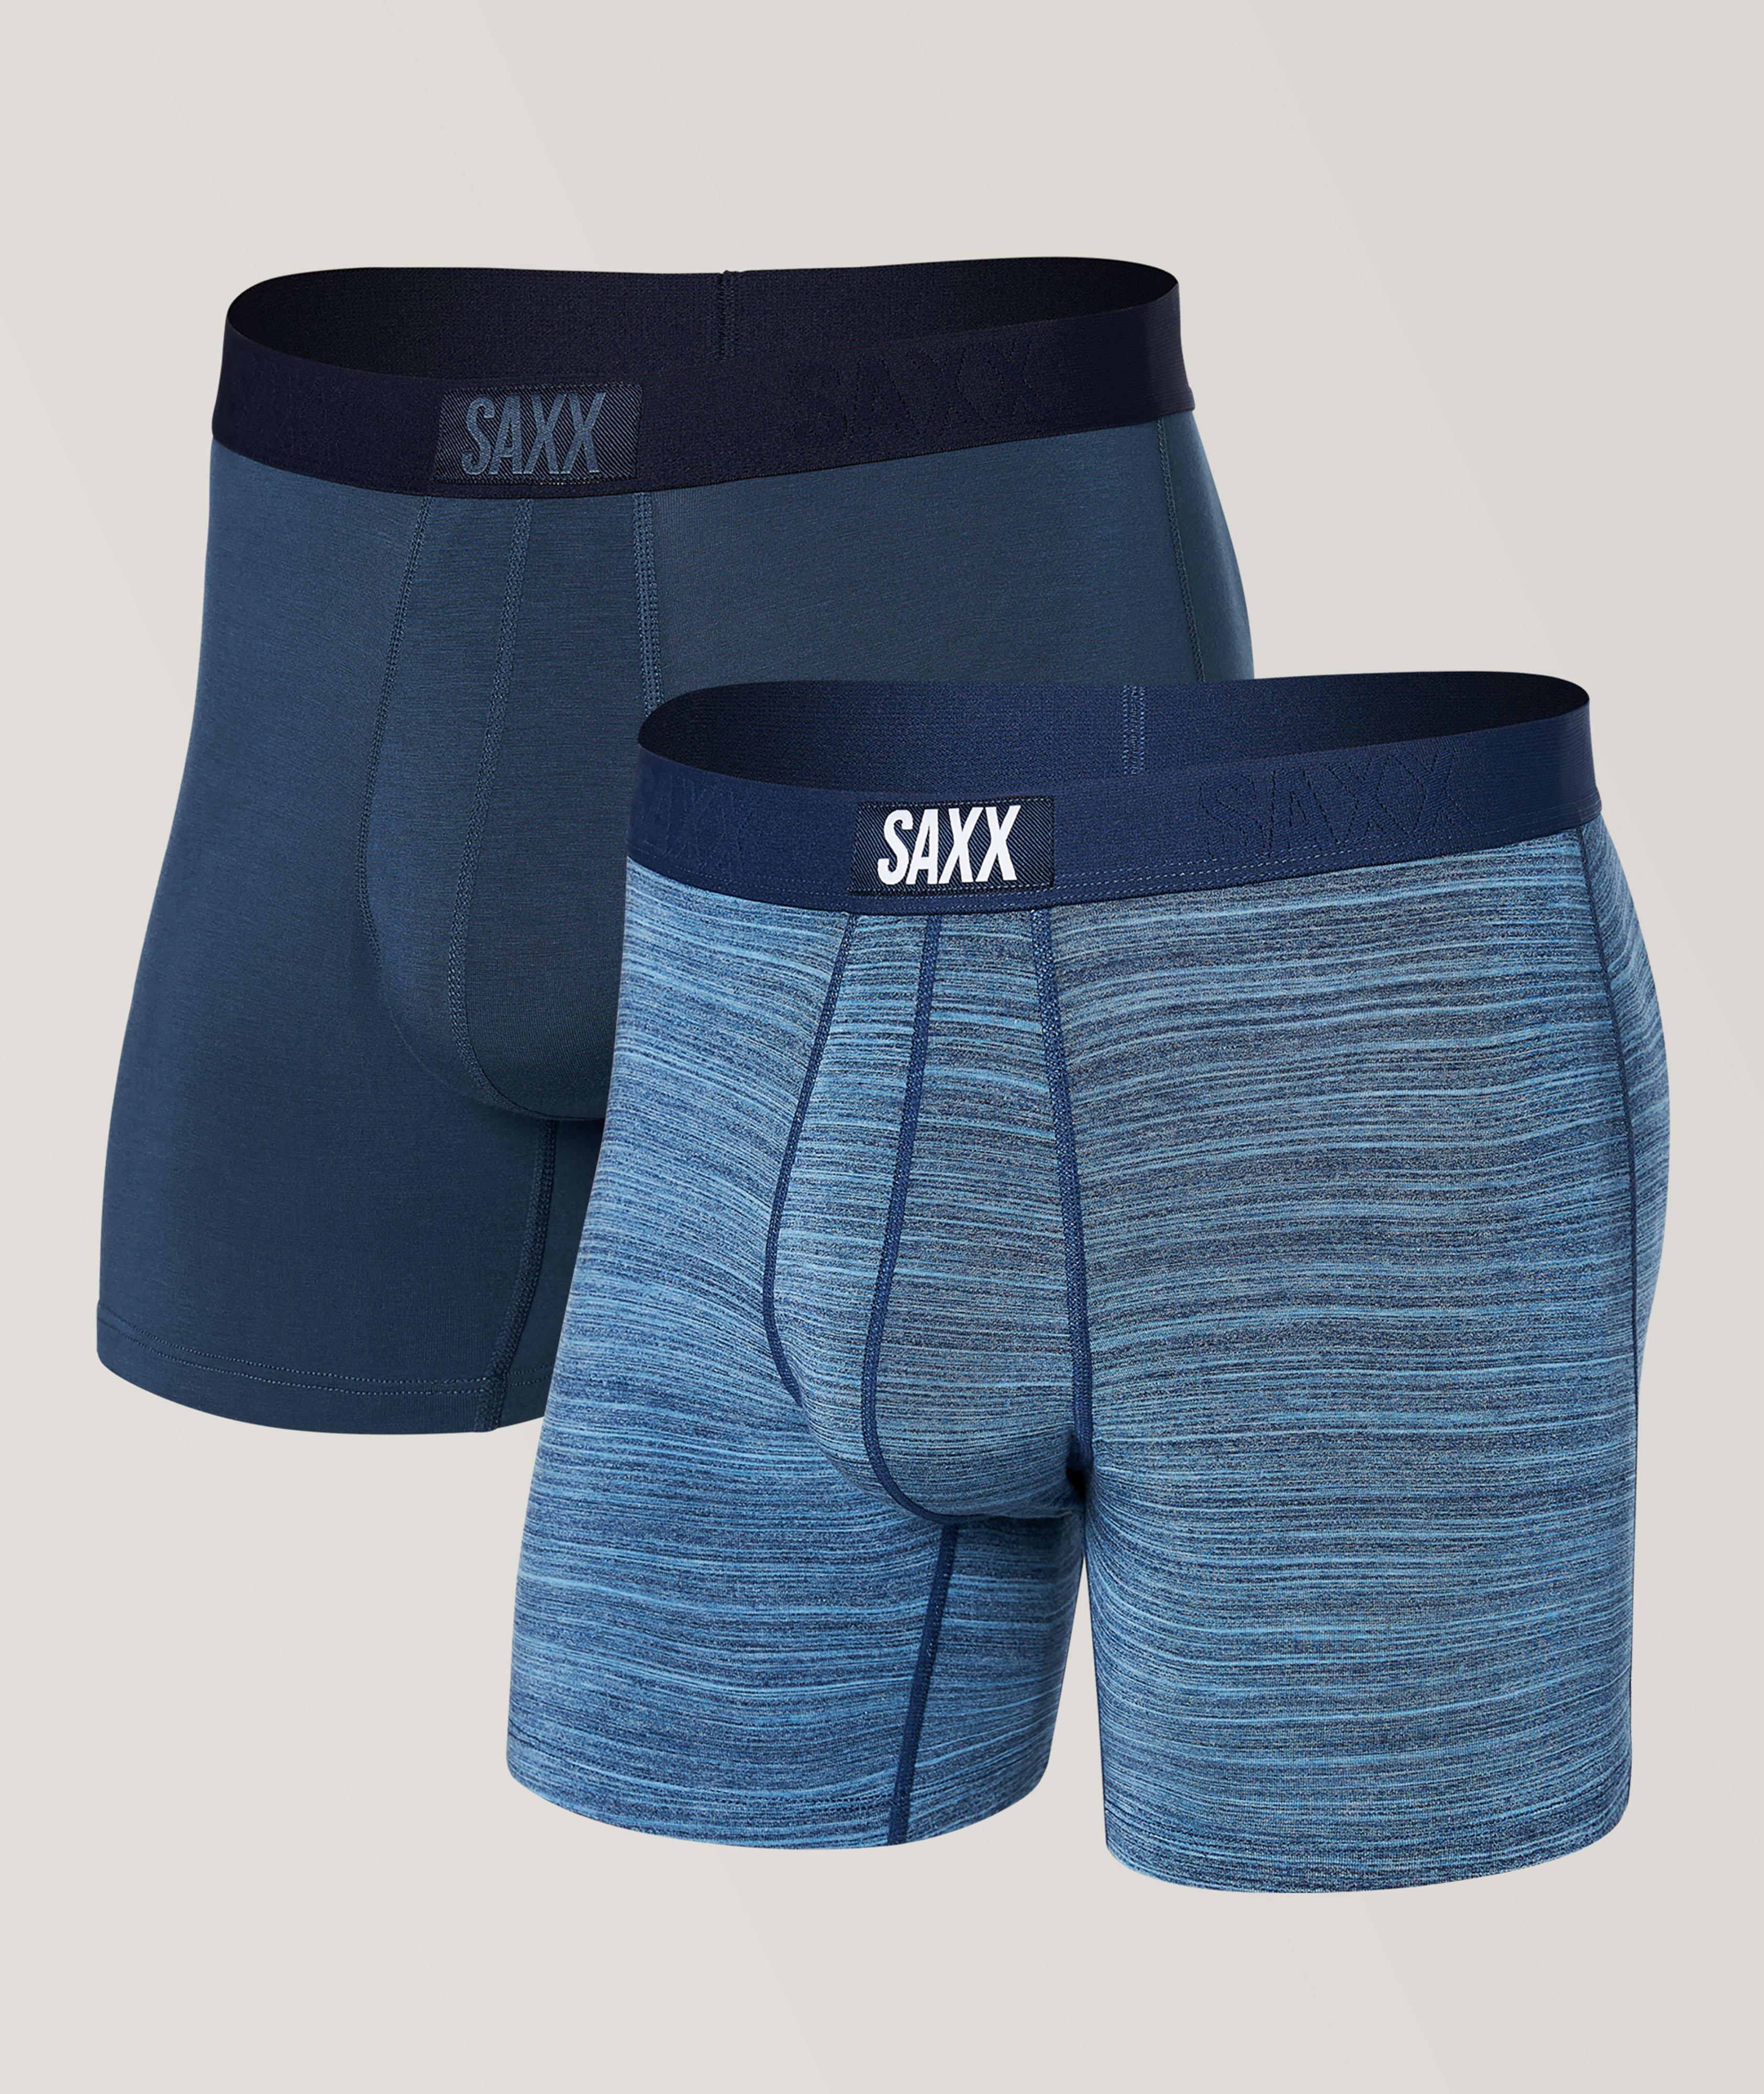 SAXX Two-Pack Vibe Solid & Mélange Boxer Briefs, Underwear